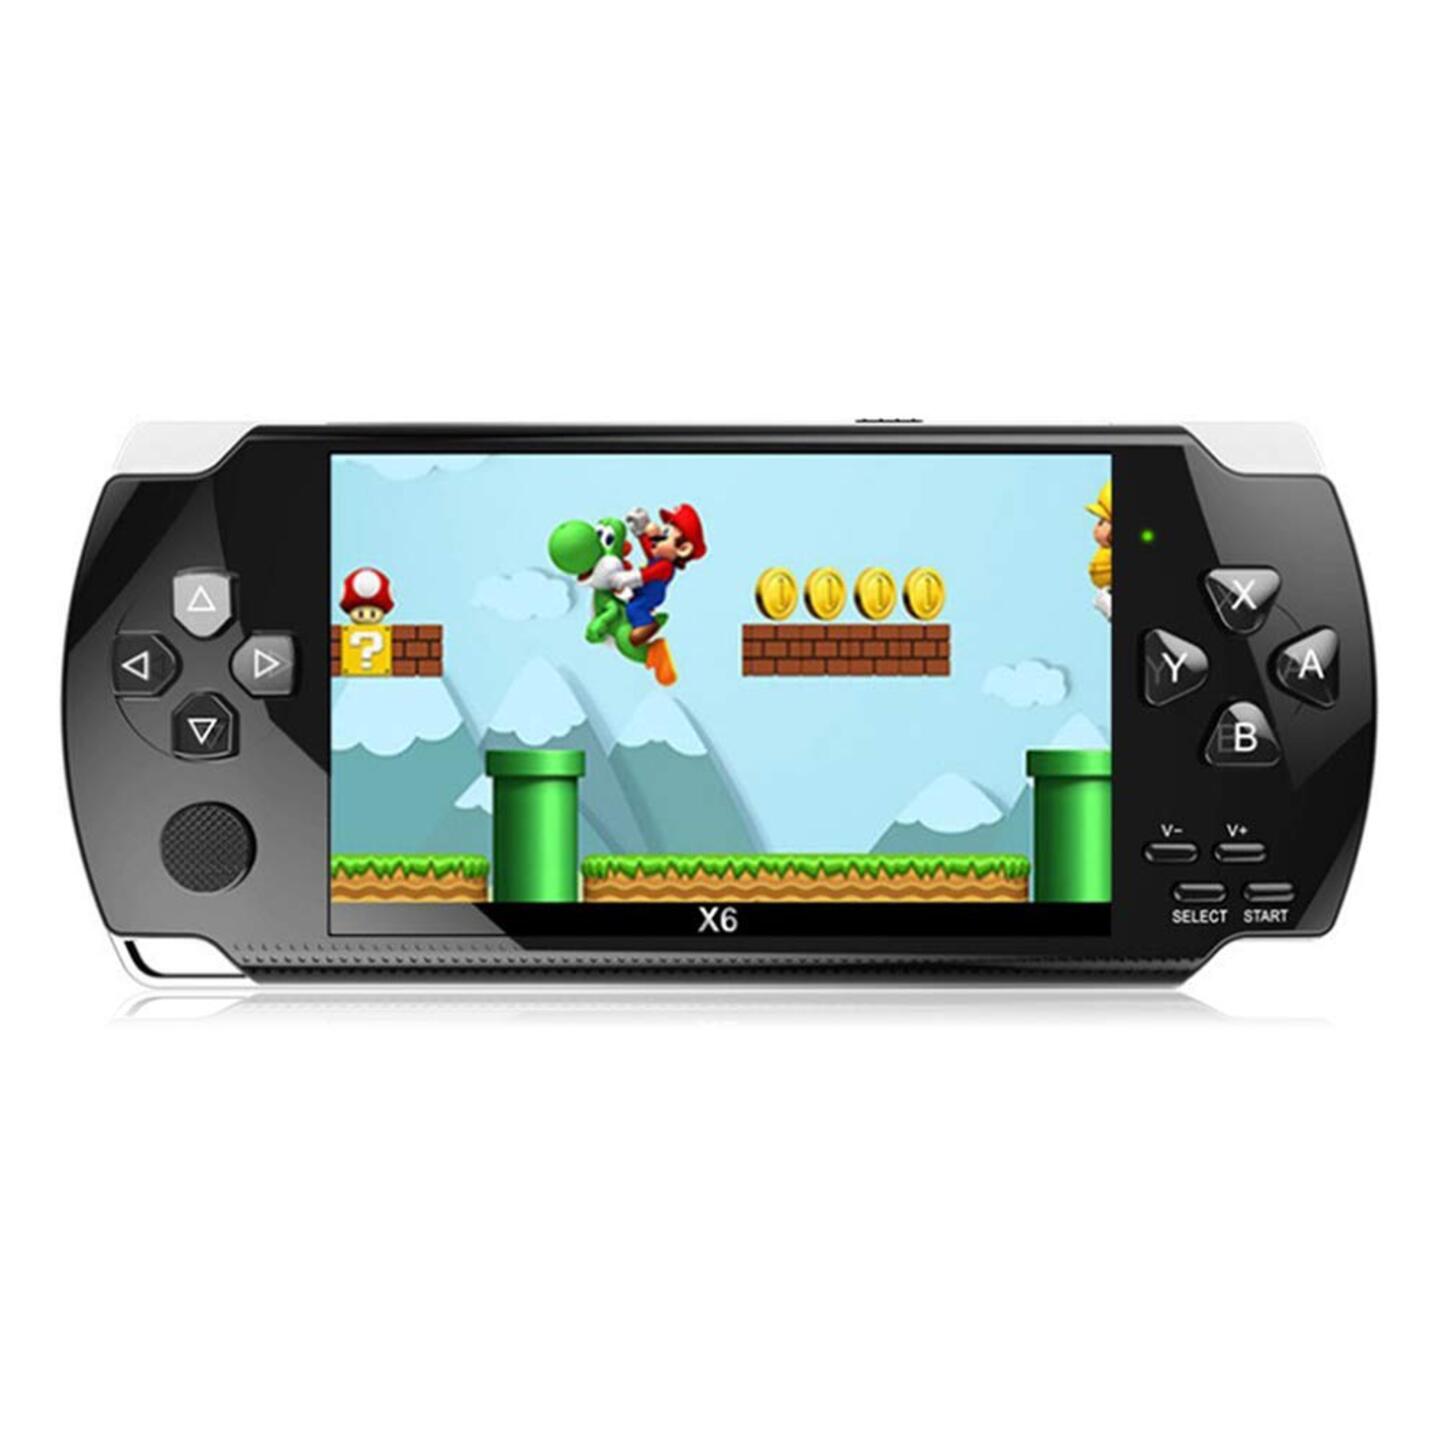 X6 Handheld 5.1 inch Game Console with camera and 21460 inbuilt games